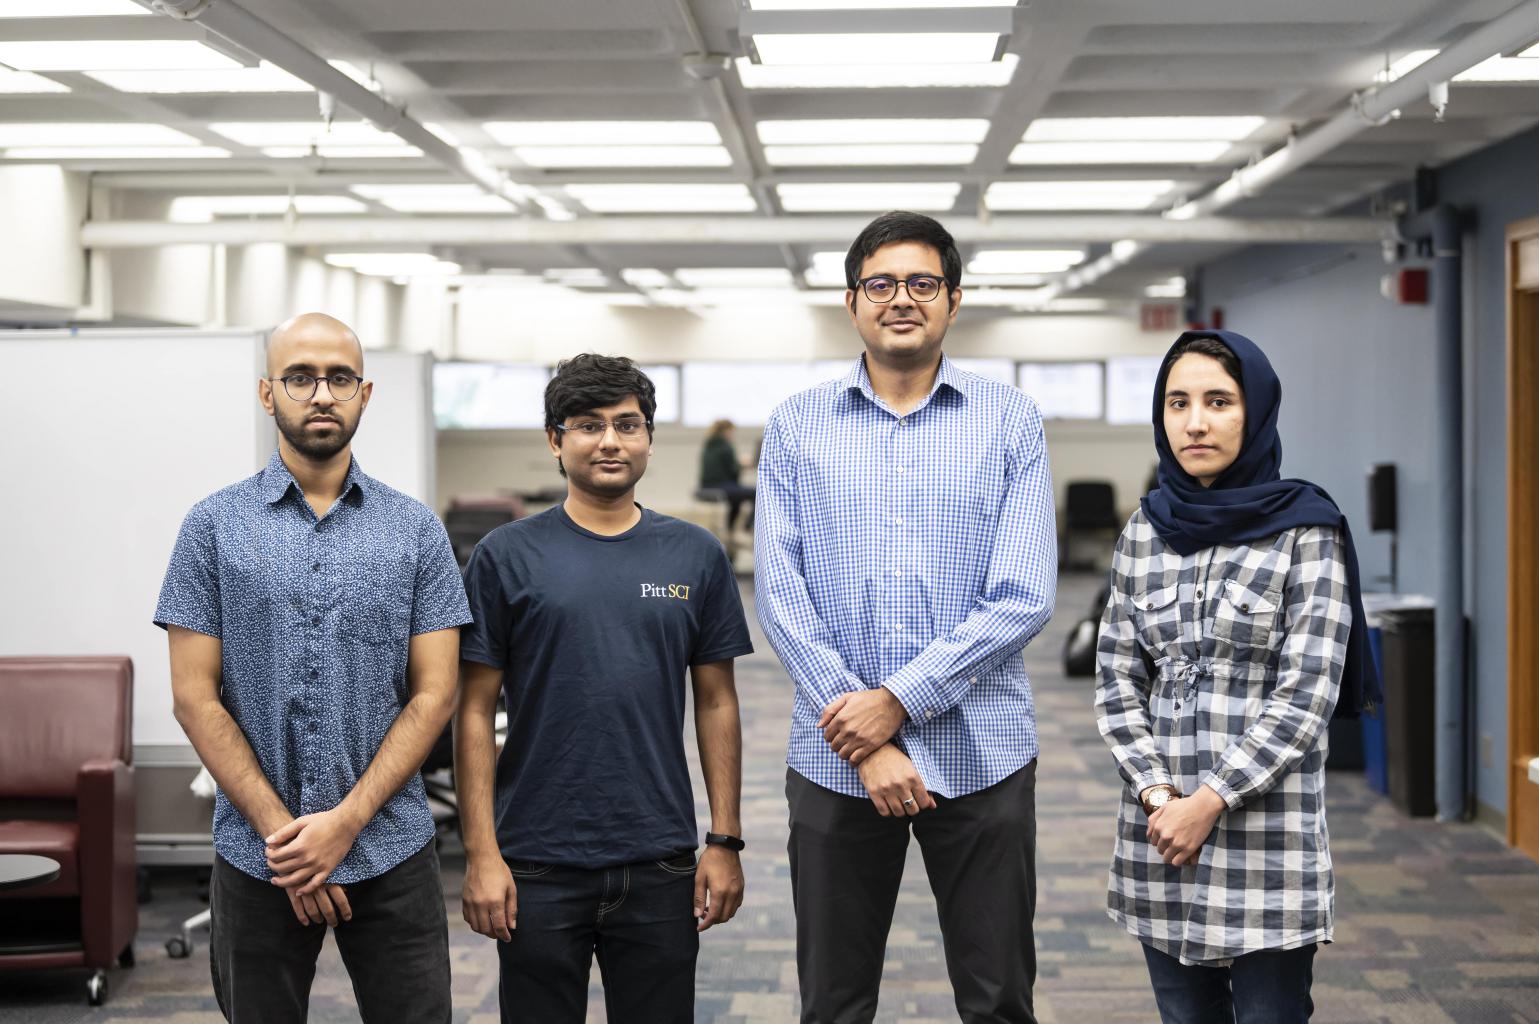 "The Quantum Information and Networking group led by Dr. Kaushik Seshadreesan. From the left, Vivek Kumar, Nitish Kumar Chandra, Dr. Seshadressan, and Mohadeseh Azari."